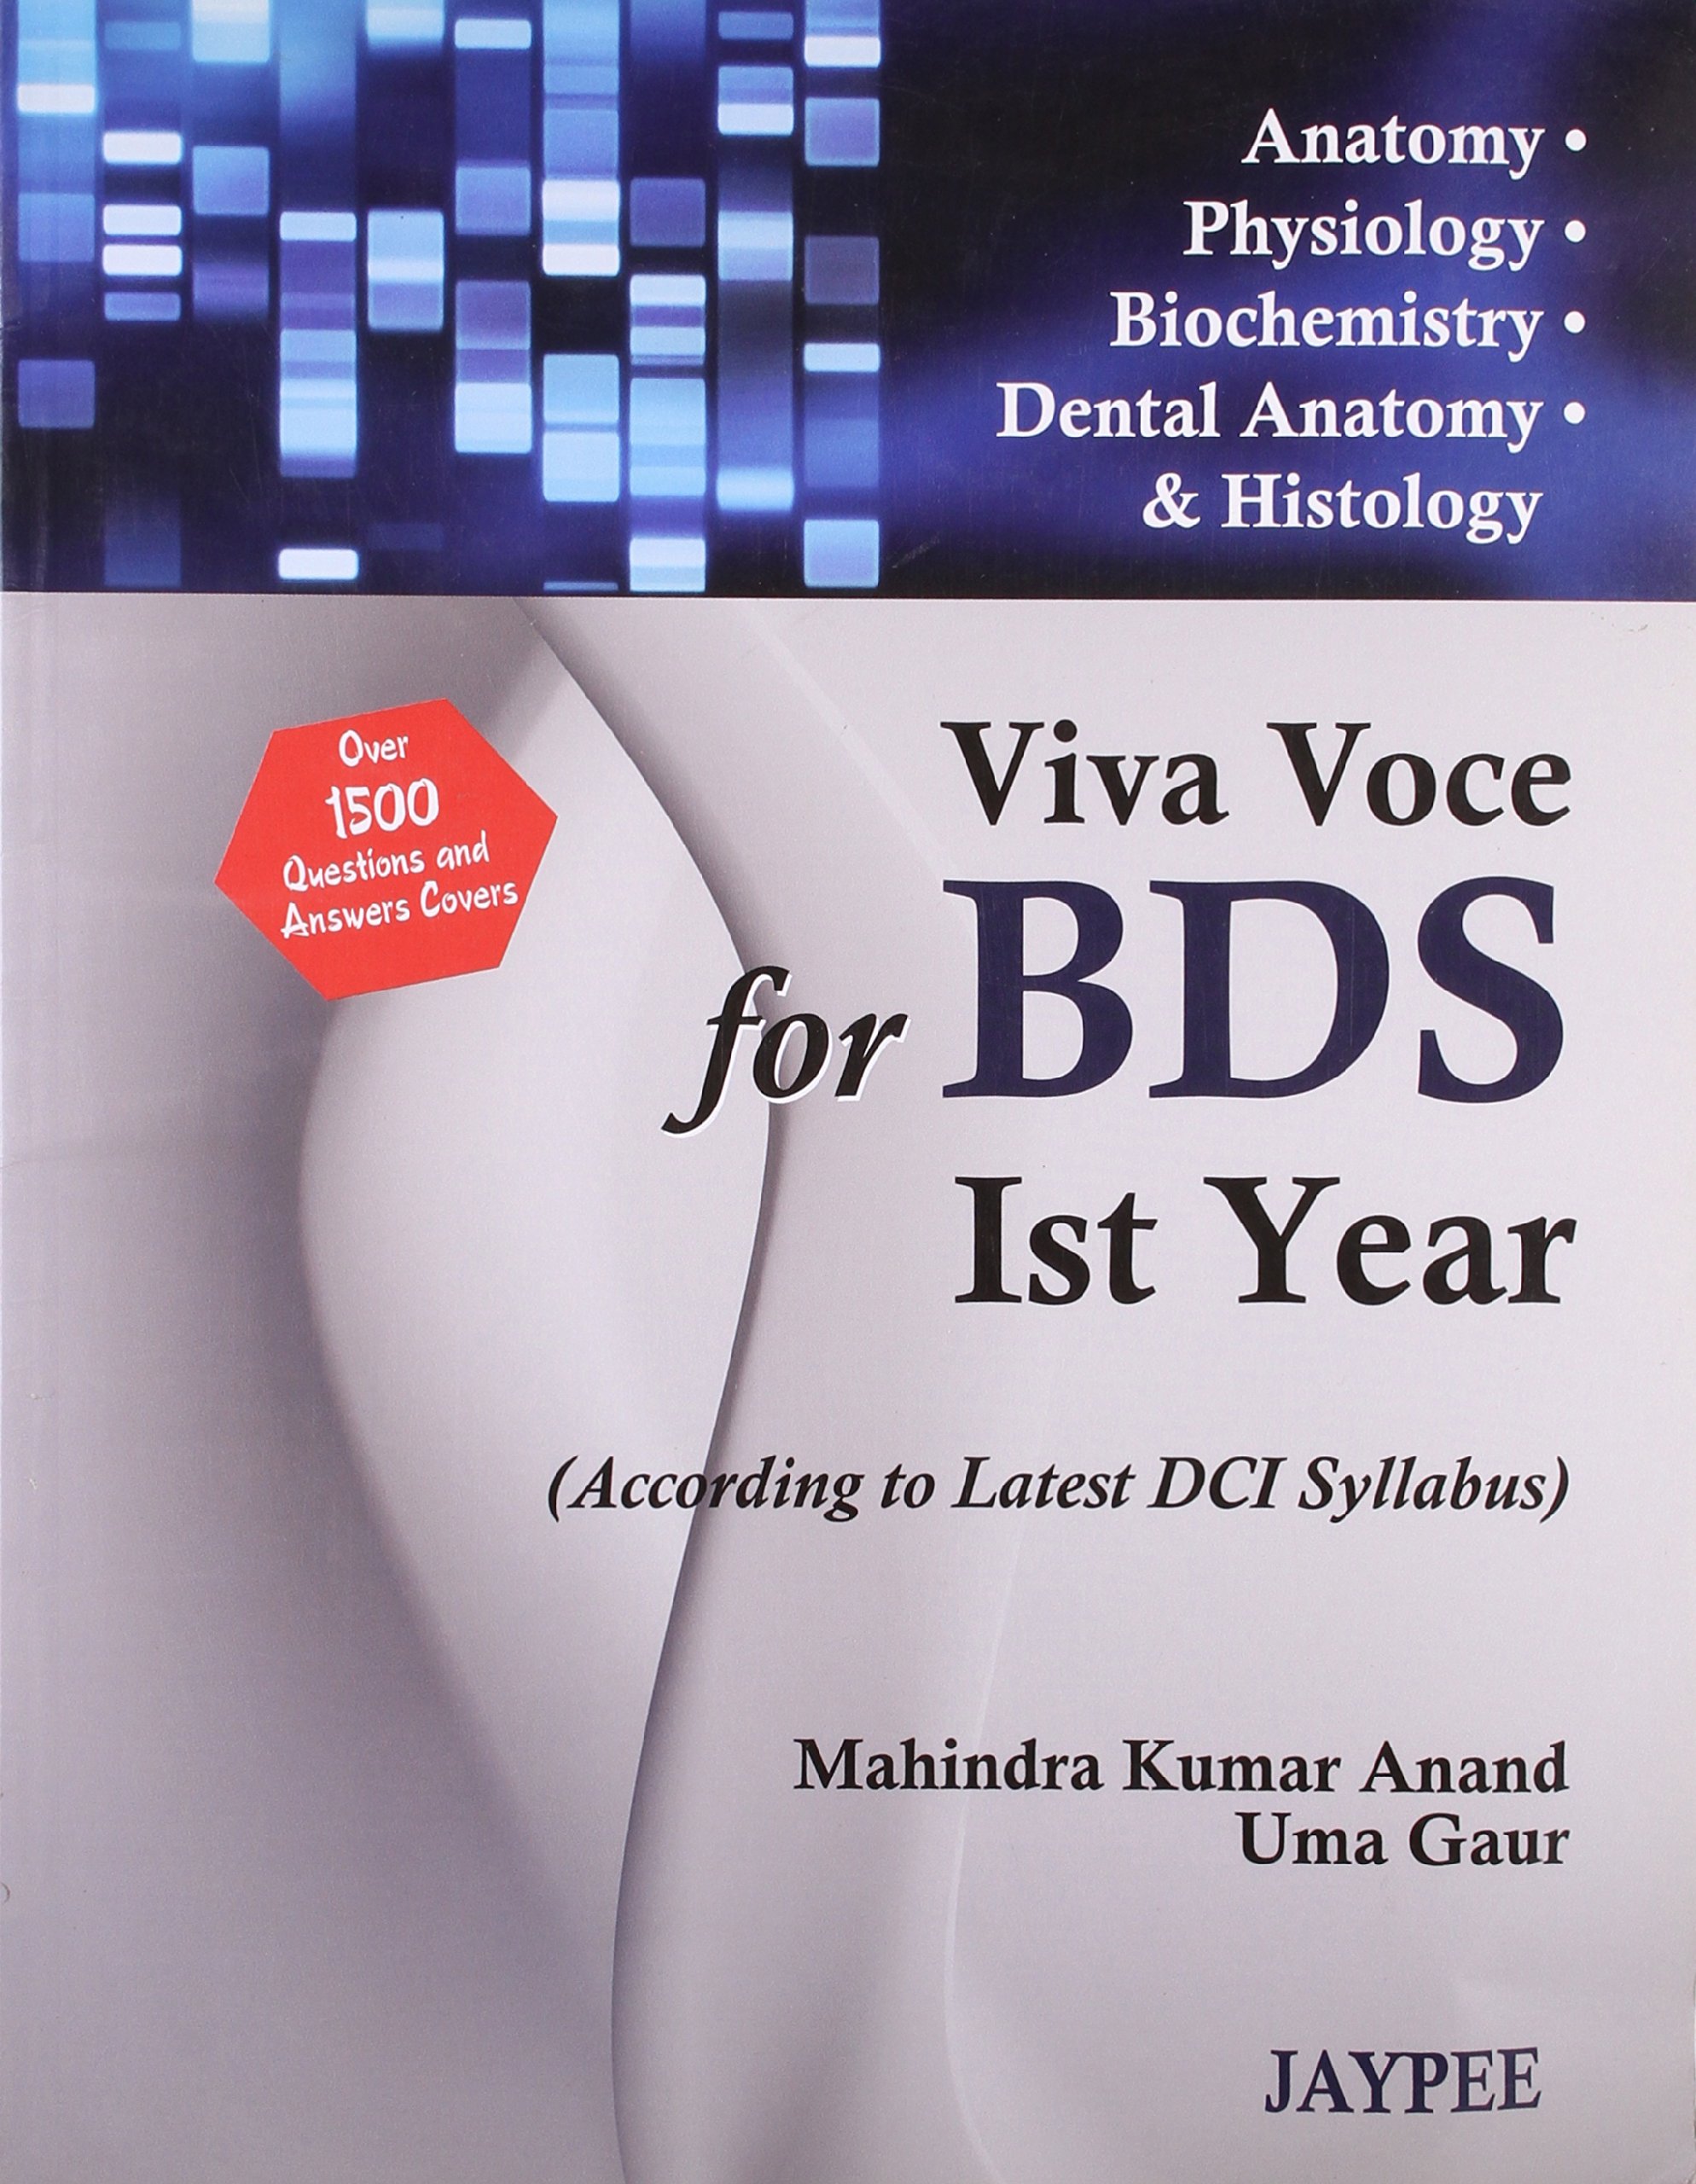 Viva Voce For Bds Ist Year(According To Latest Dci Syllabus)